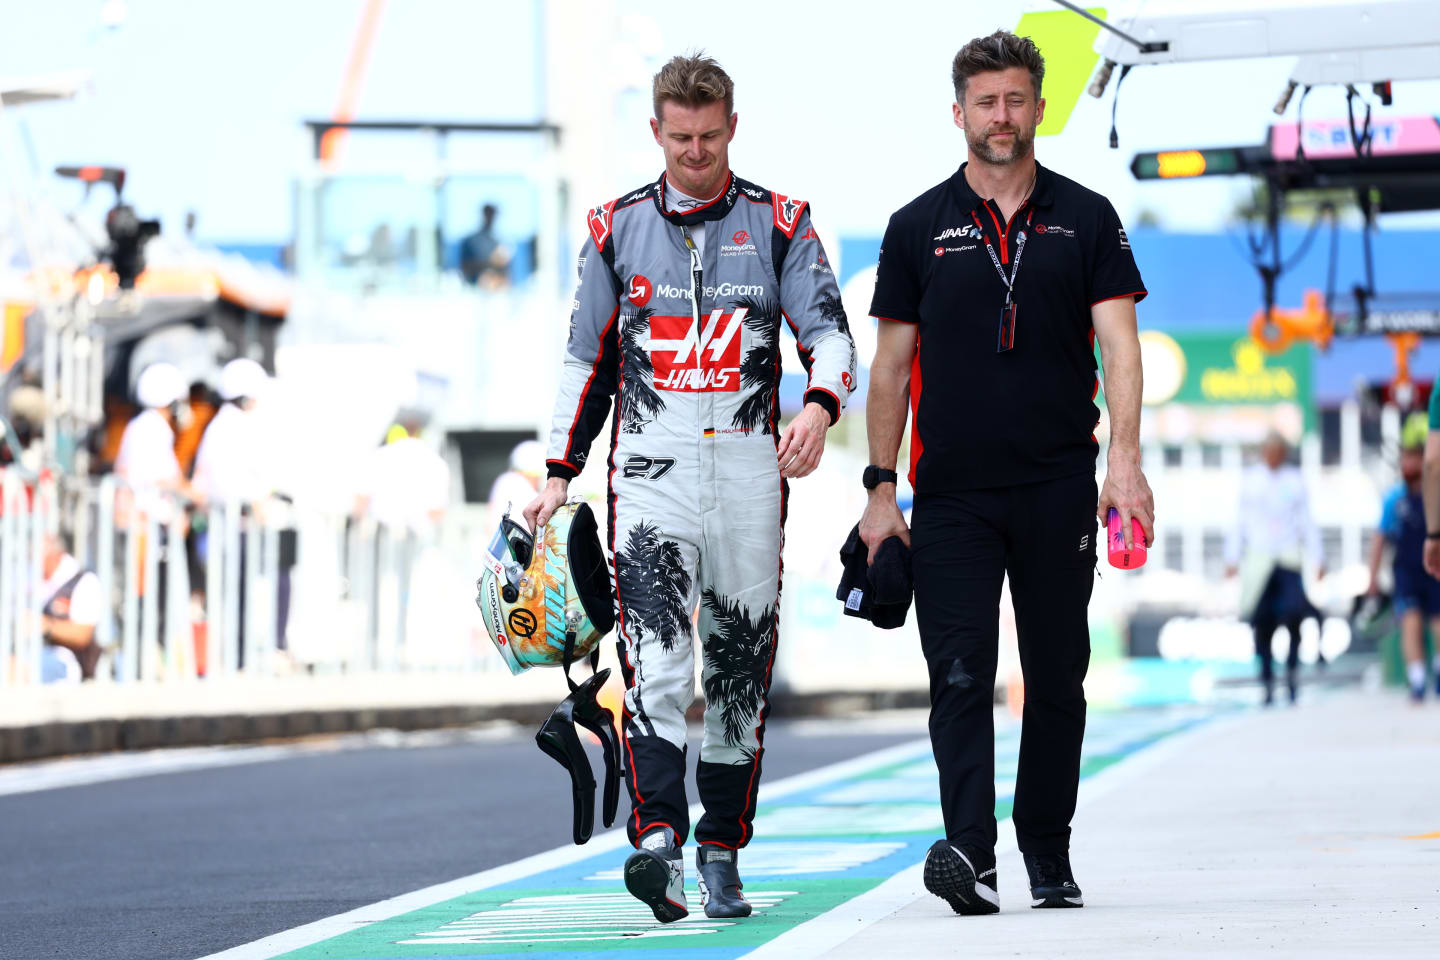 MIAMI, FLORIDA - MAY 06: 12th placed qualifier Nico Hulkenberg of Germany and Haas F1 walks in the Pitlane during qualifying ahead of the F1 Grand Prix of Miami at Miami International Autodrome on May 06, 2023 in Miami, Florida. (Photo by Mark Thompson/Getty Images)